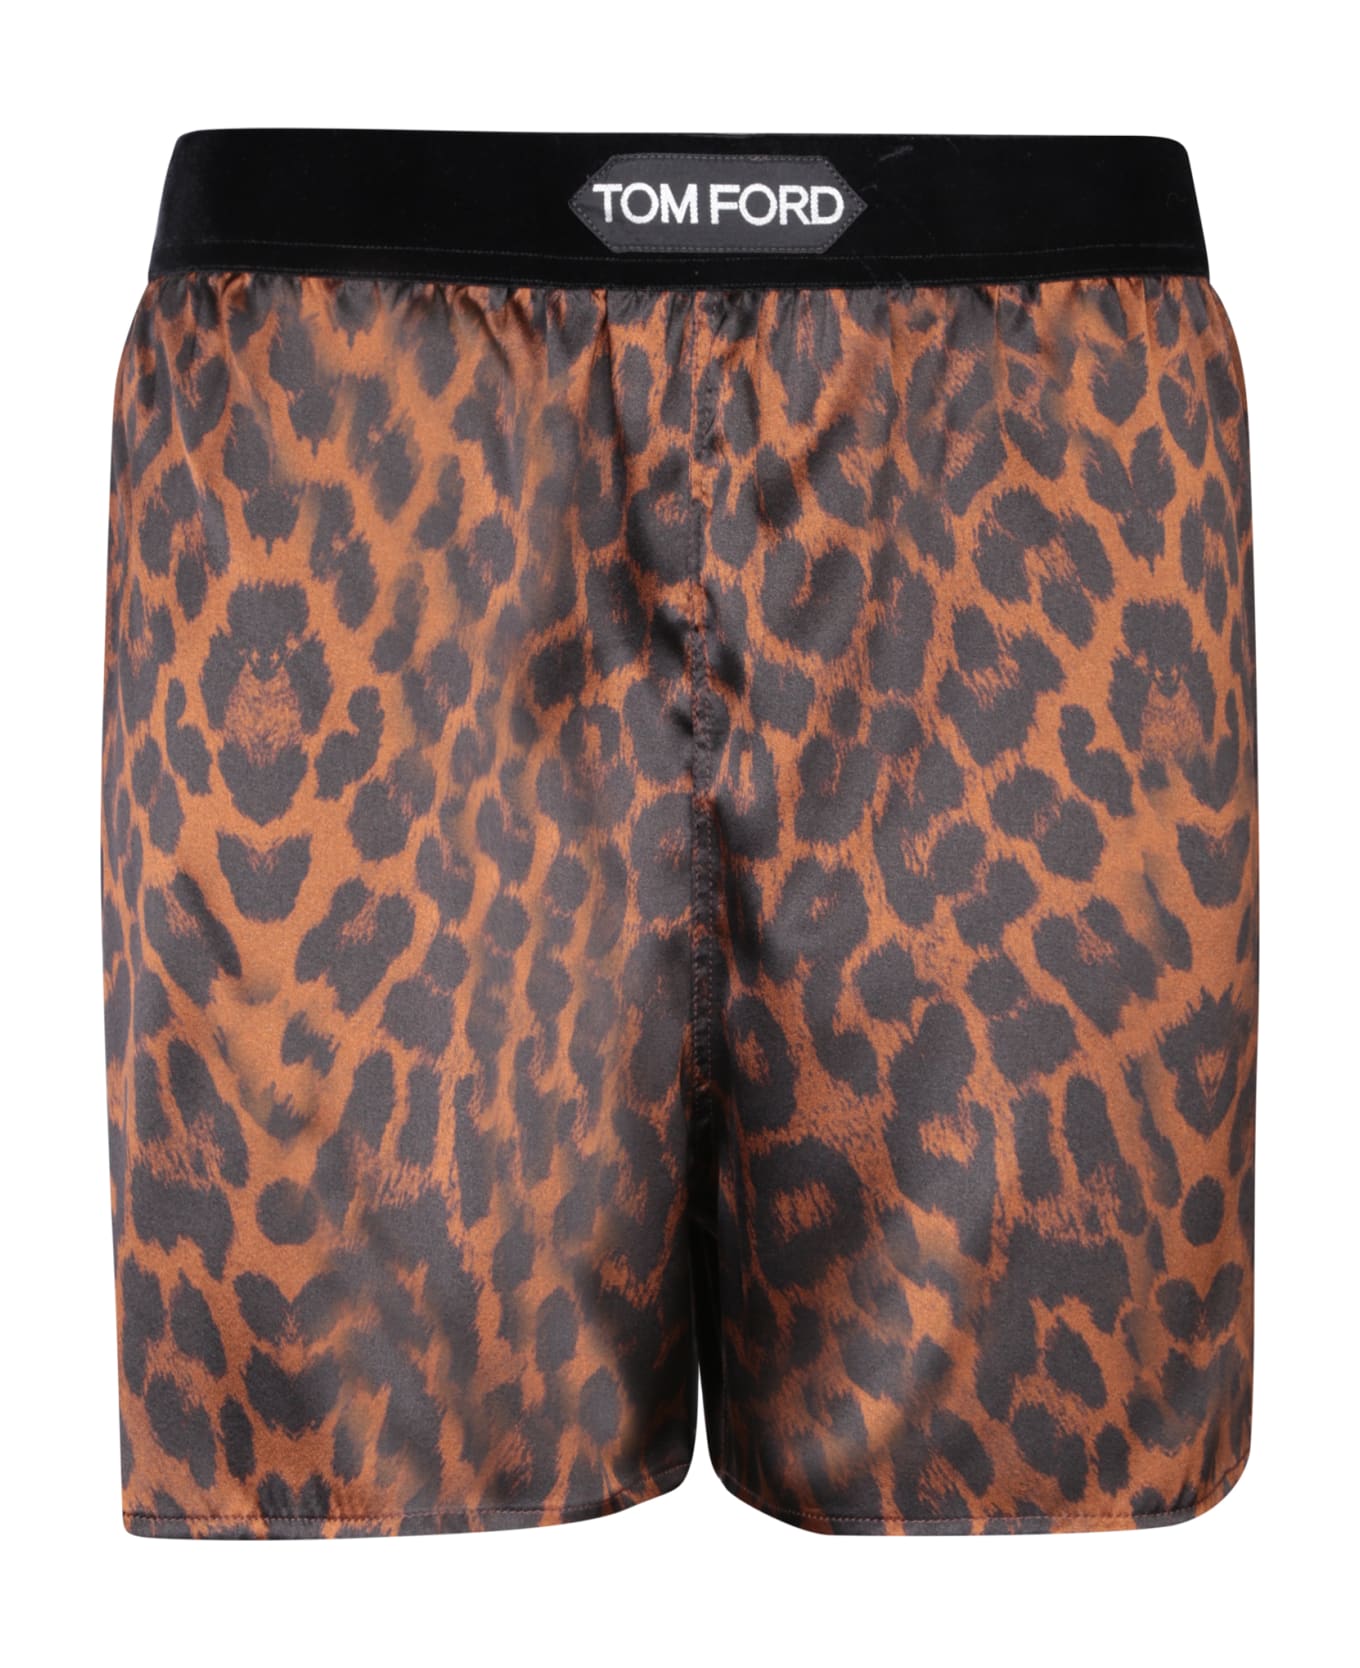 Tom Ford Boxer Shorts - LEOPARD